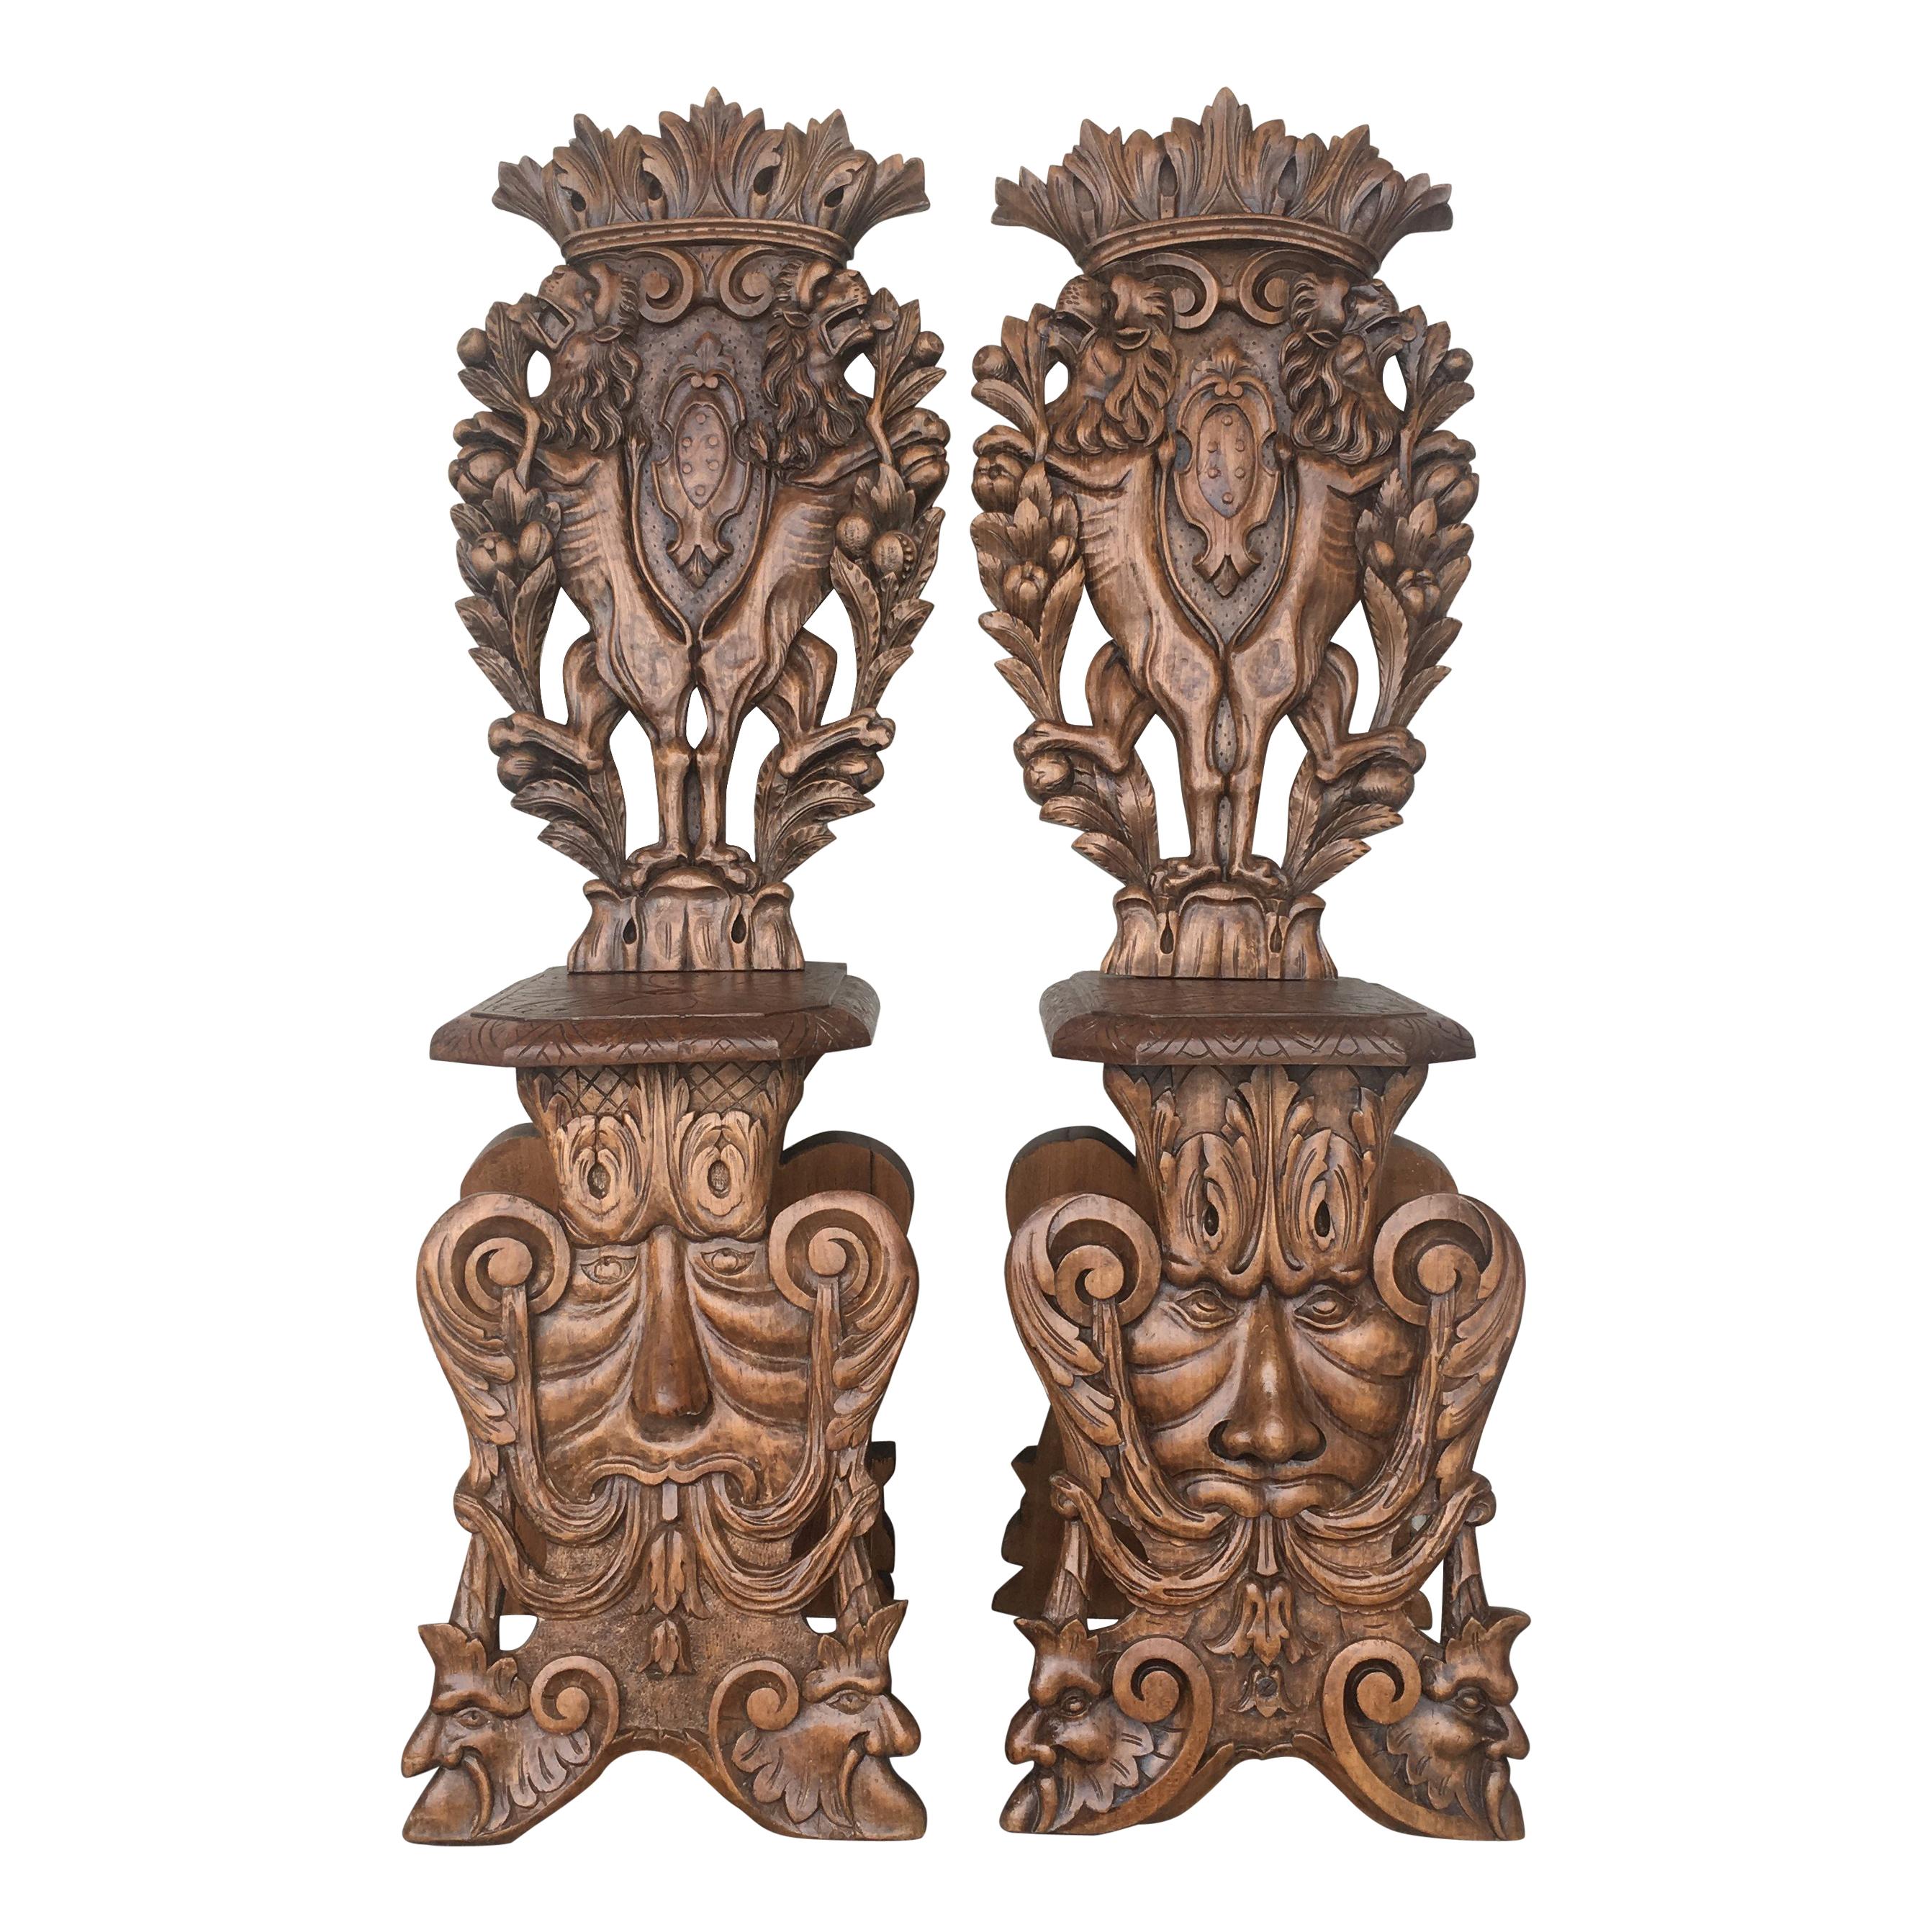 Pair of 18th Century Italian Renaissance Lion Carved Walnut Sgabello Hall Chairs For Sale